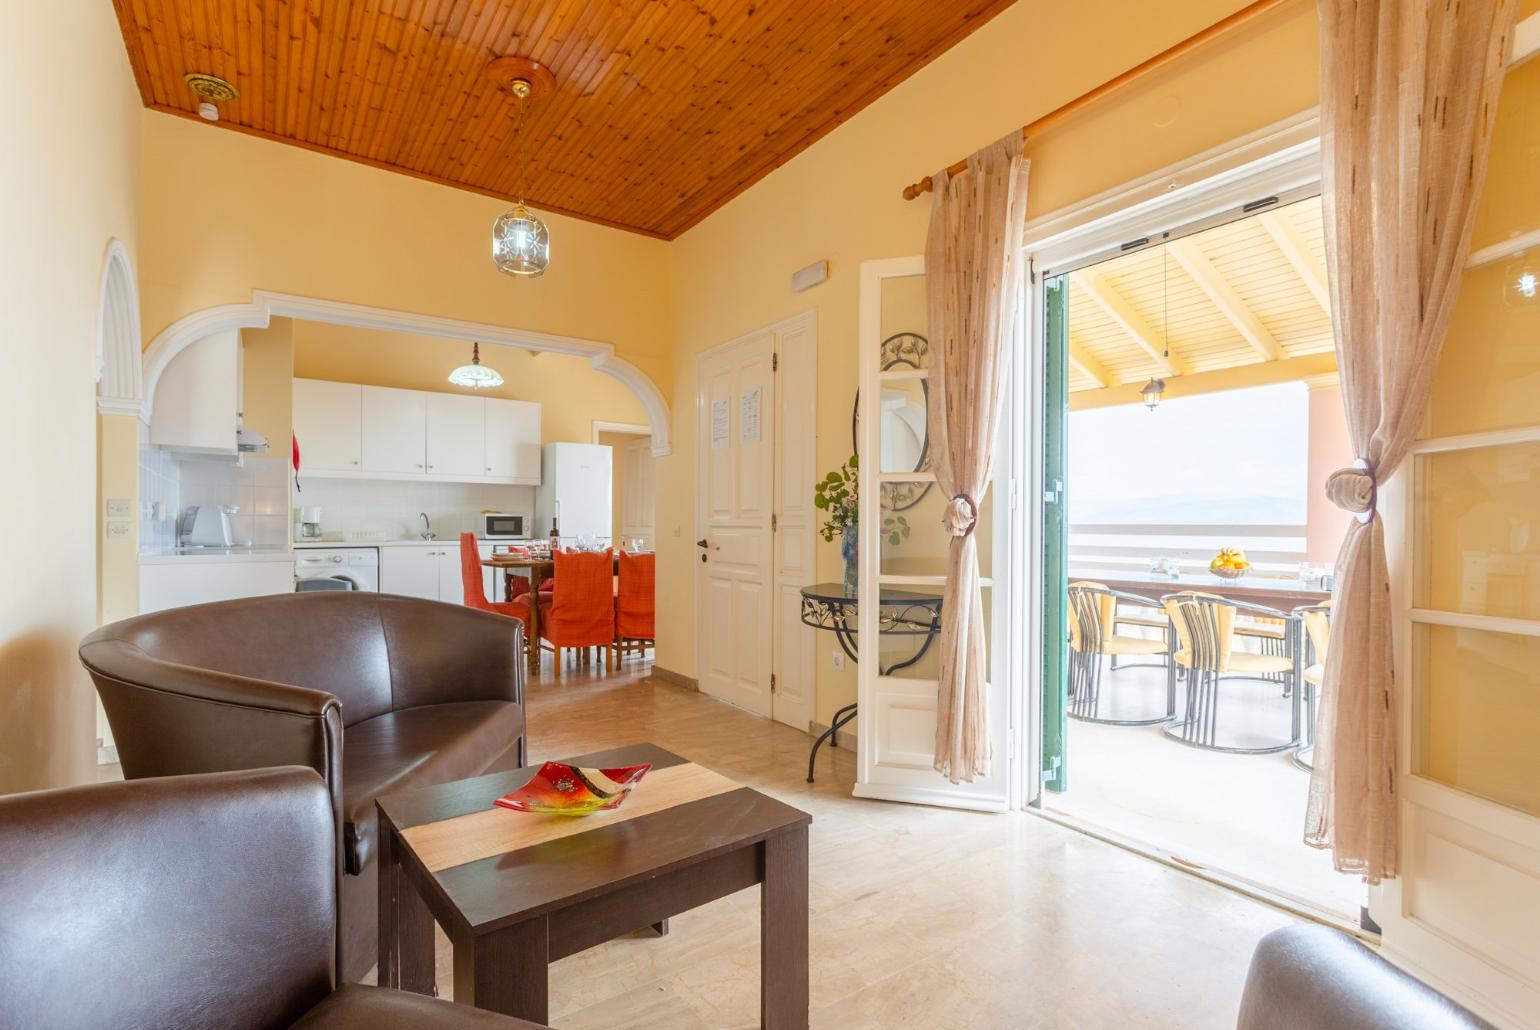 Open-plan living room with sofas, dining area, kitchen, WiFi internet, satellite TV, DVD player, and balcony access with sea views